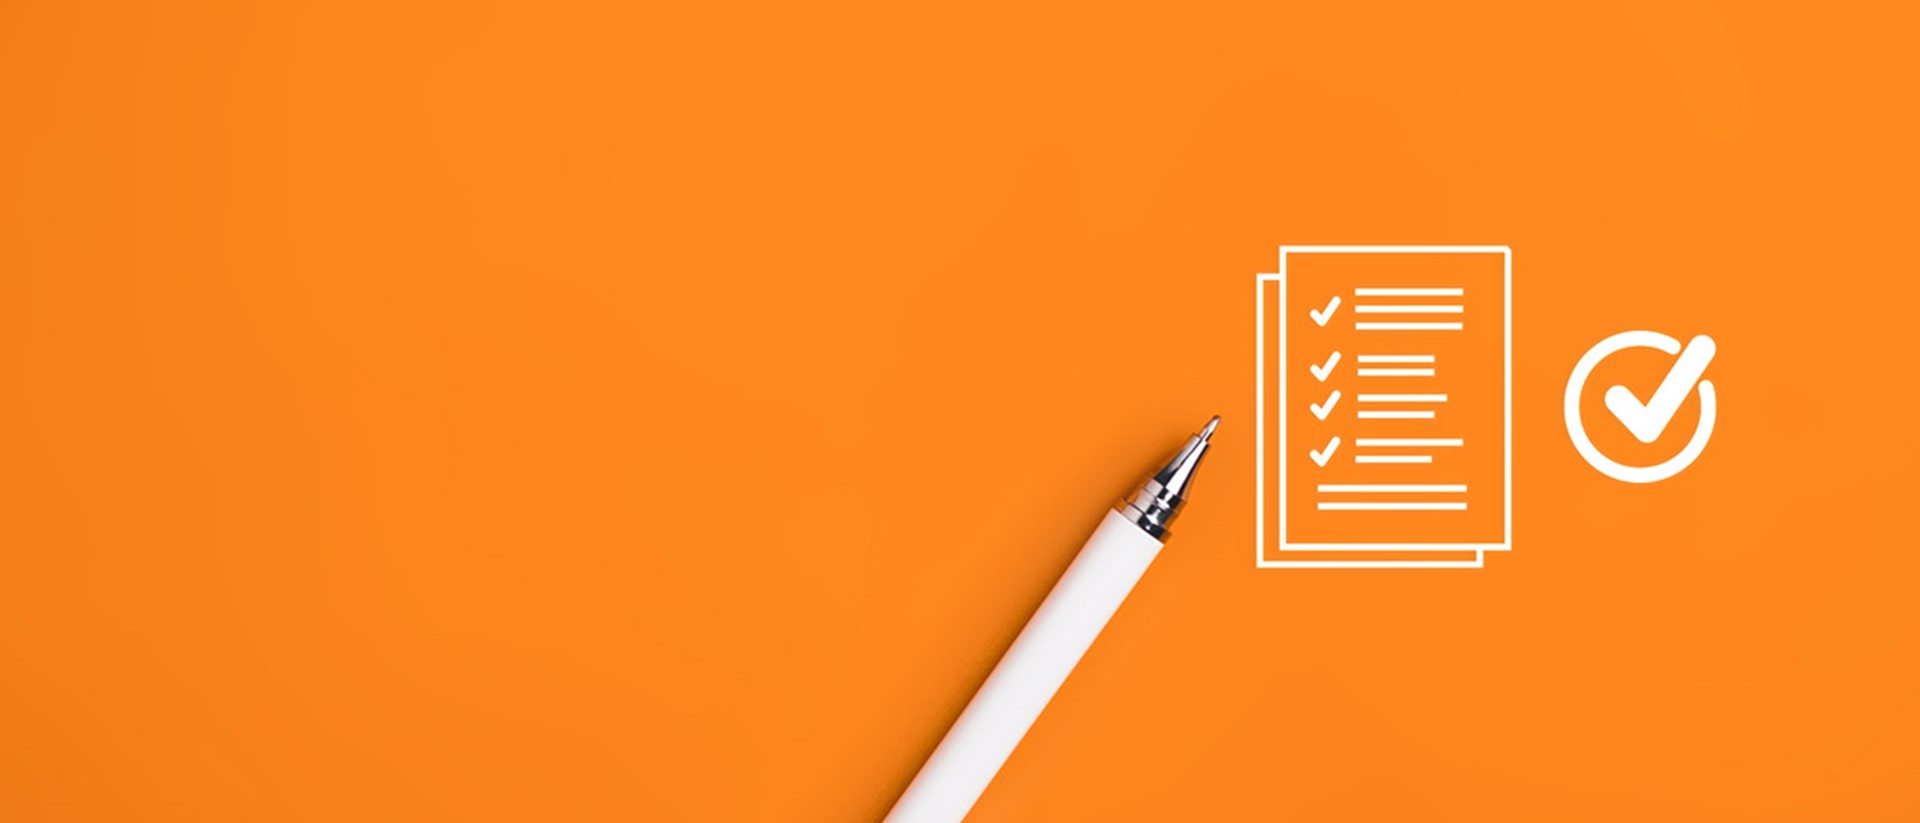 A white pen and a white outline of a checklist against an orange background